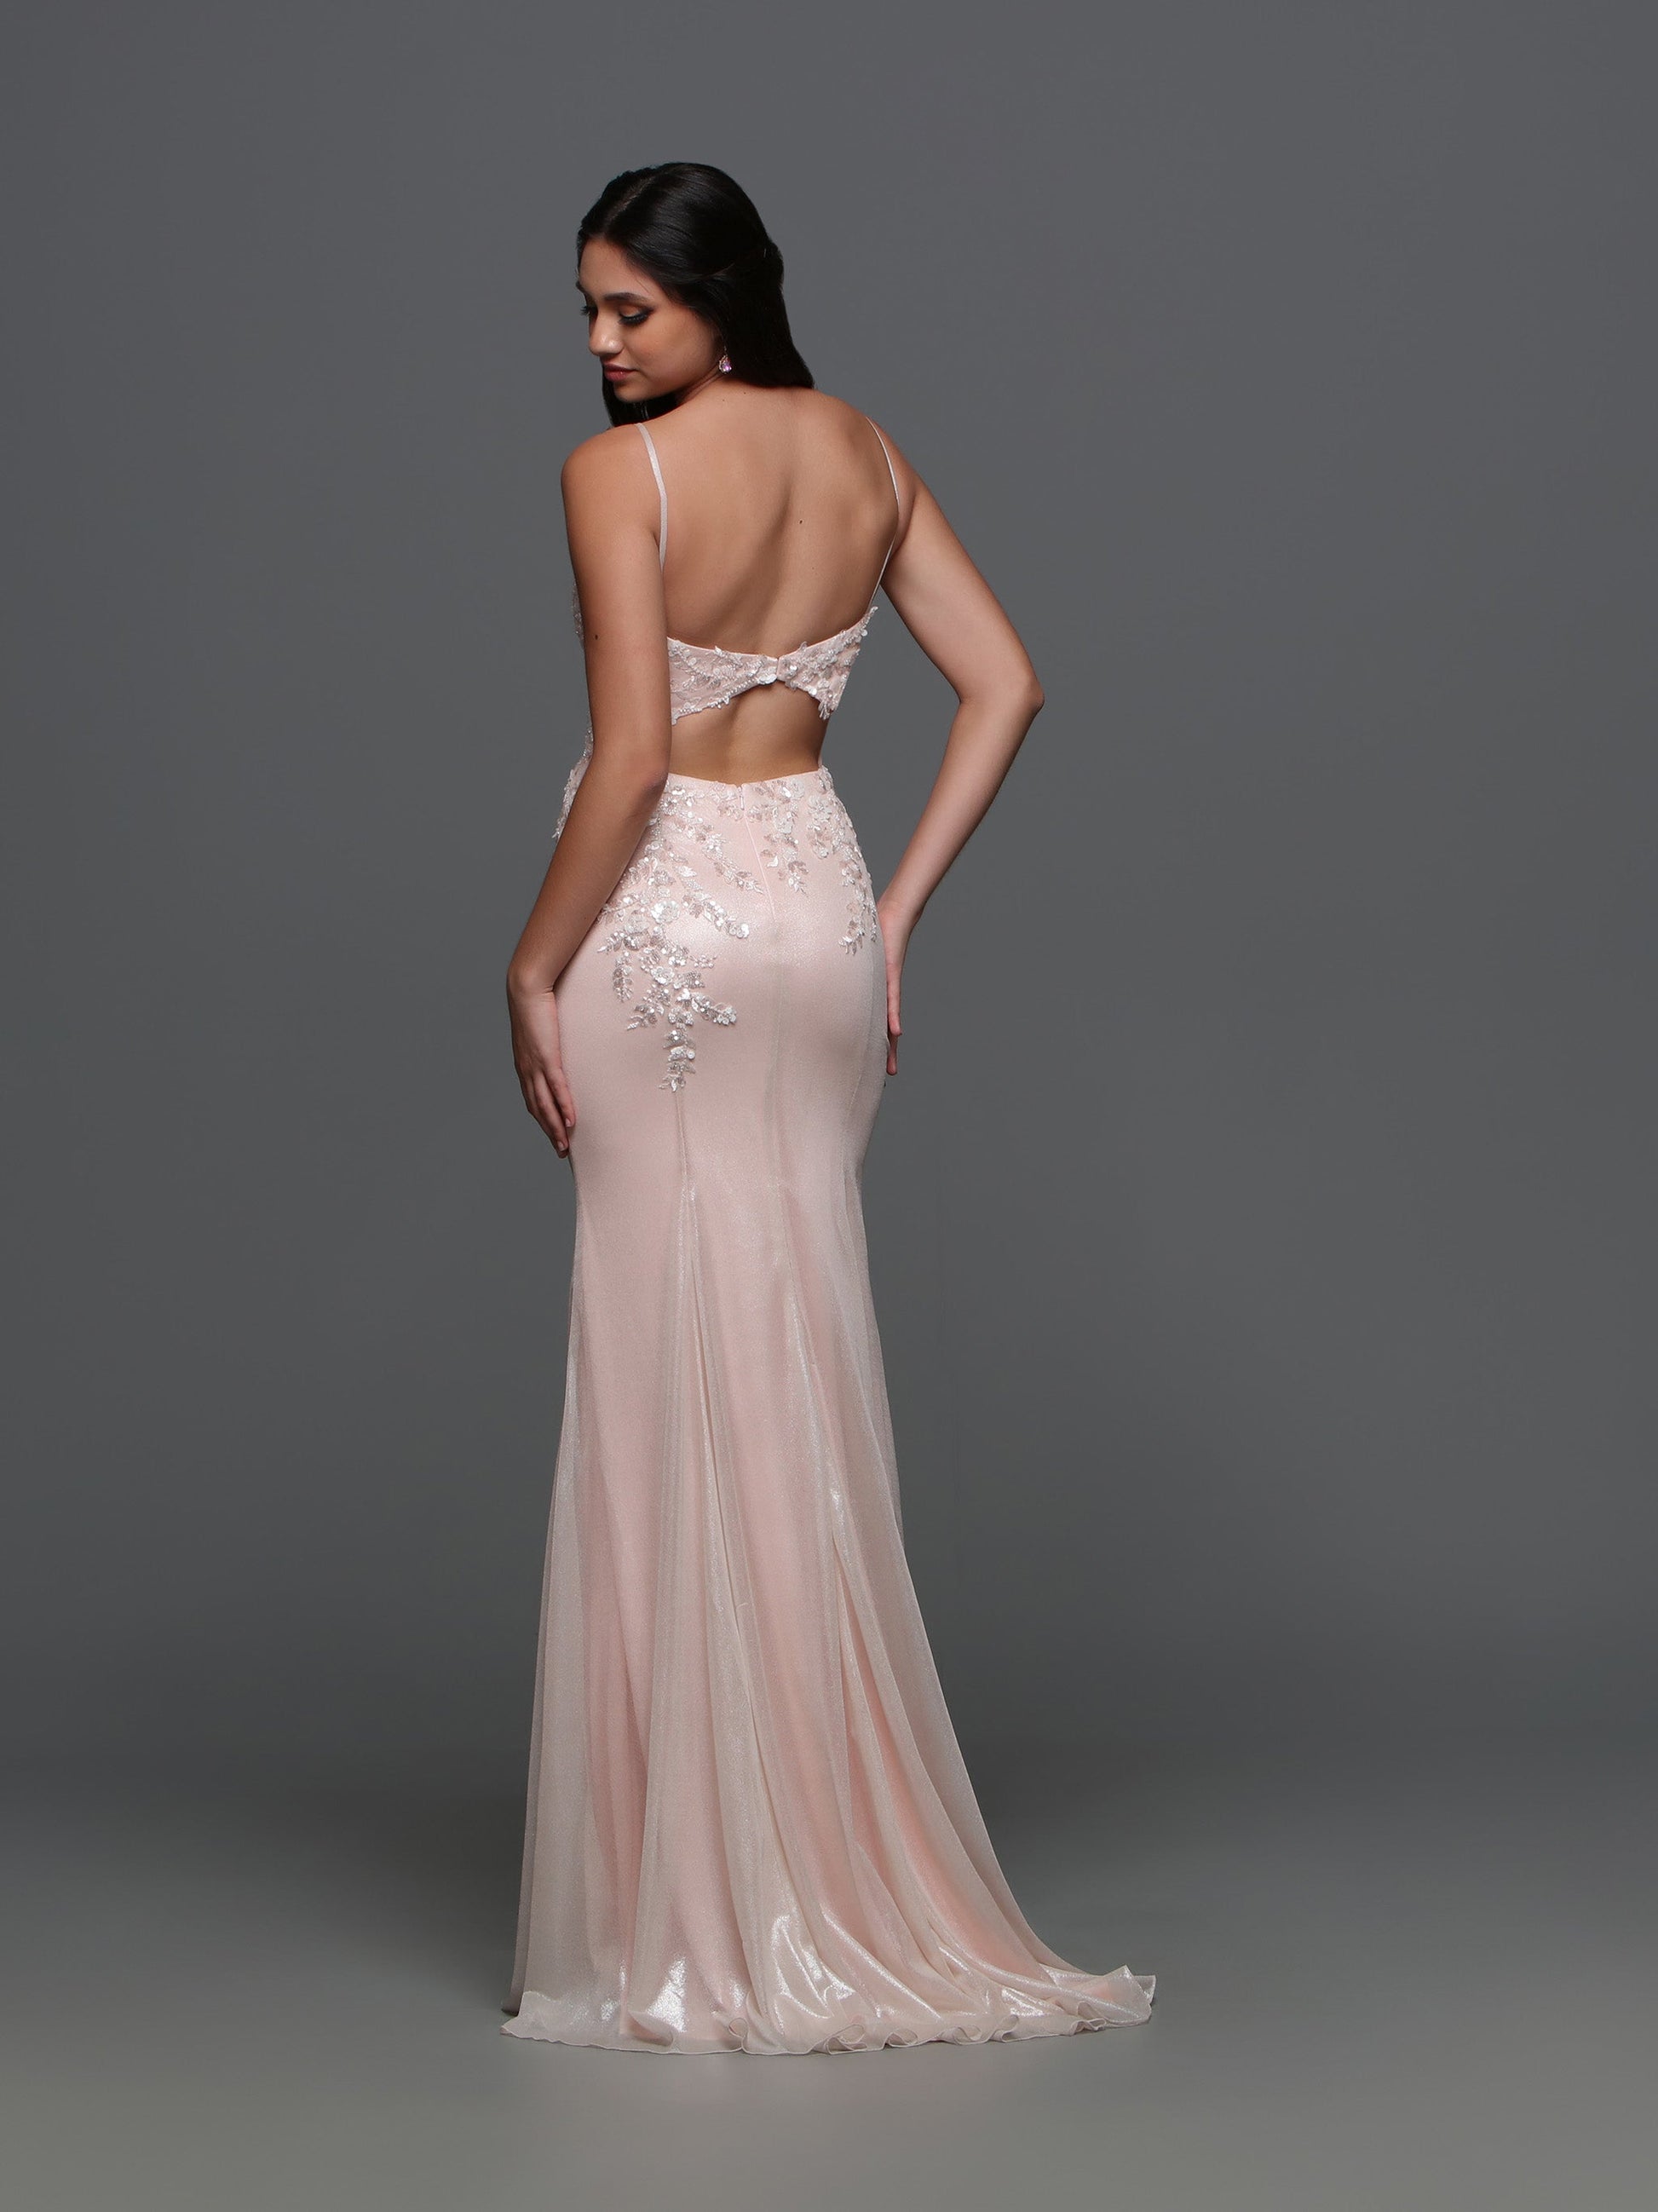 This Candice Wang evening gown style 72331 exudes elegance and sophistication. With its fitted silhouette and metallic shimmer, it will make you stand out at any formal event. The lace, beaded sequin details and cutout back add a touch of glamour. Perfect for prom or any special occasion.  Sizes: 0-10  Colors: Ice Pink, Lavender